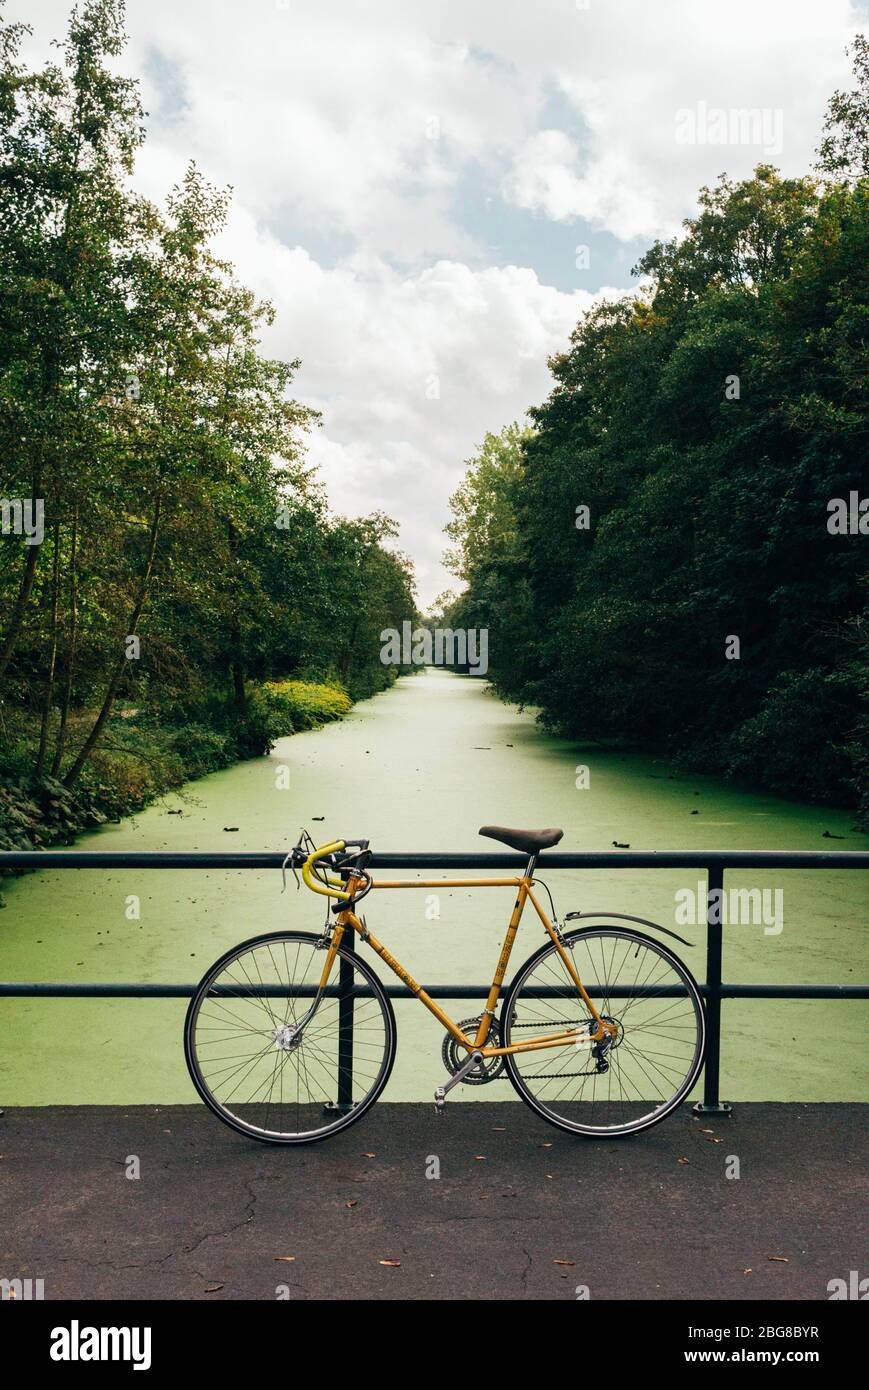 vintage yellow racing bike leaning on a bridge. green lined canal, trees, calm and peaceful background Stock Photo